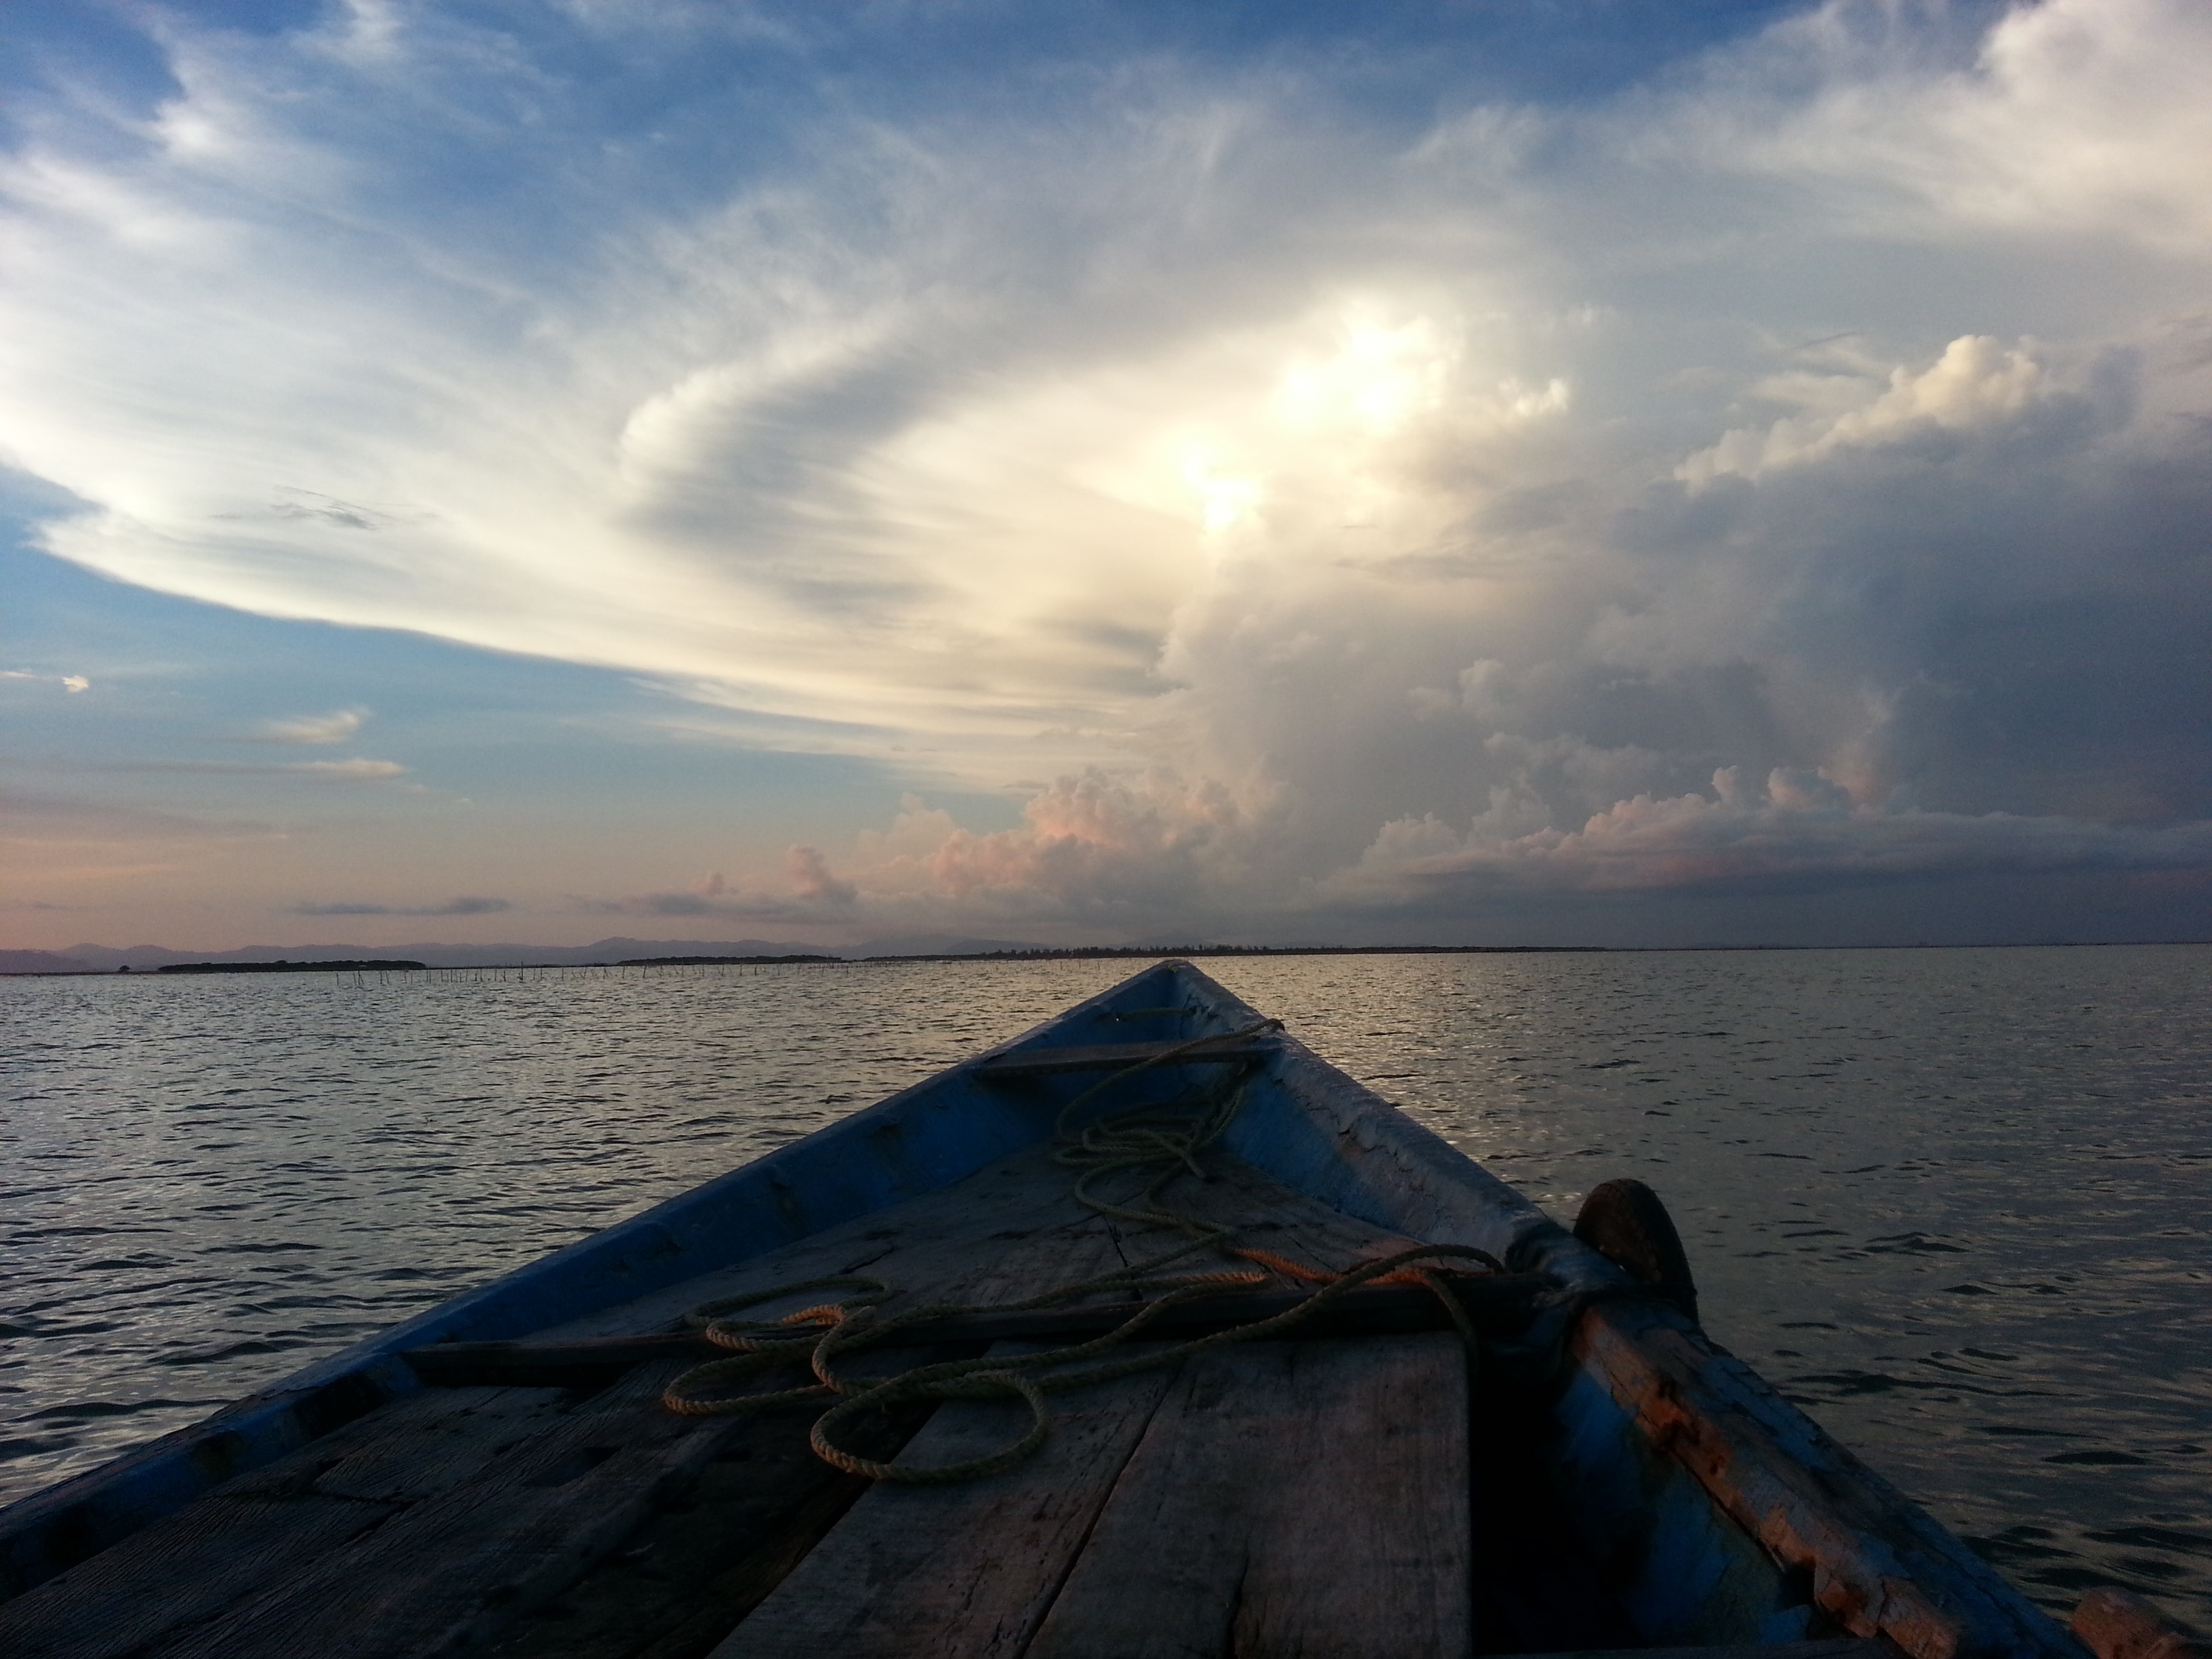 blue and brown wooden boat on body of water under cloudy sky during daytime